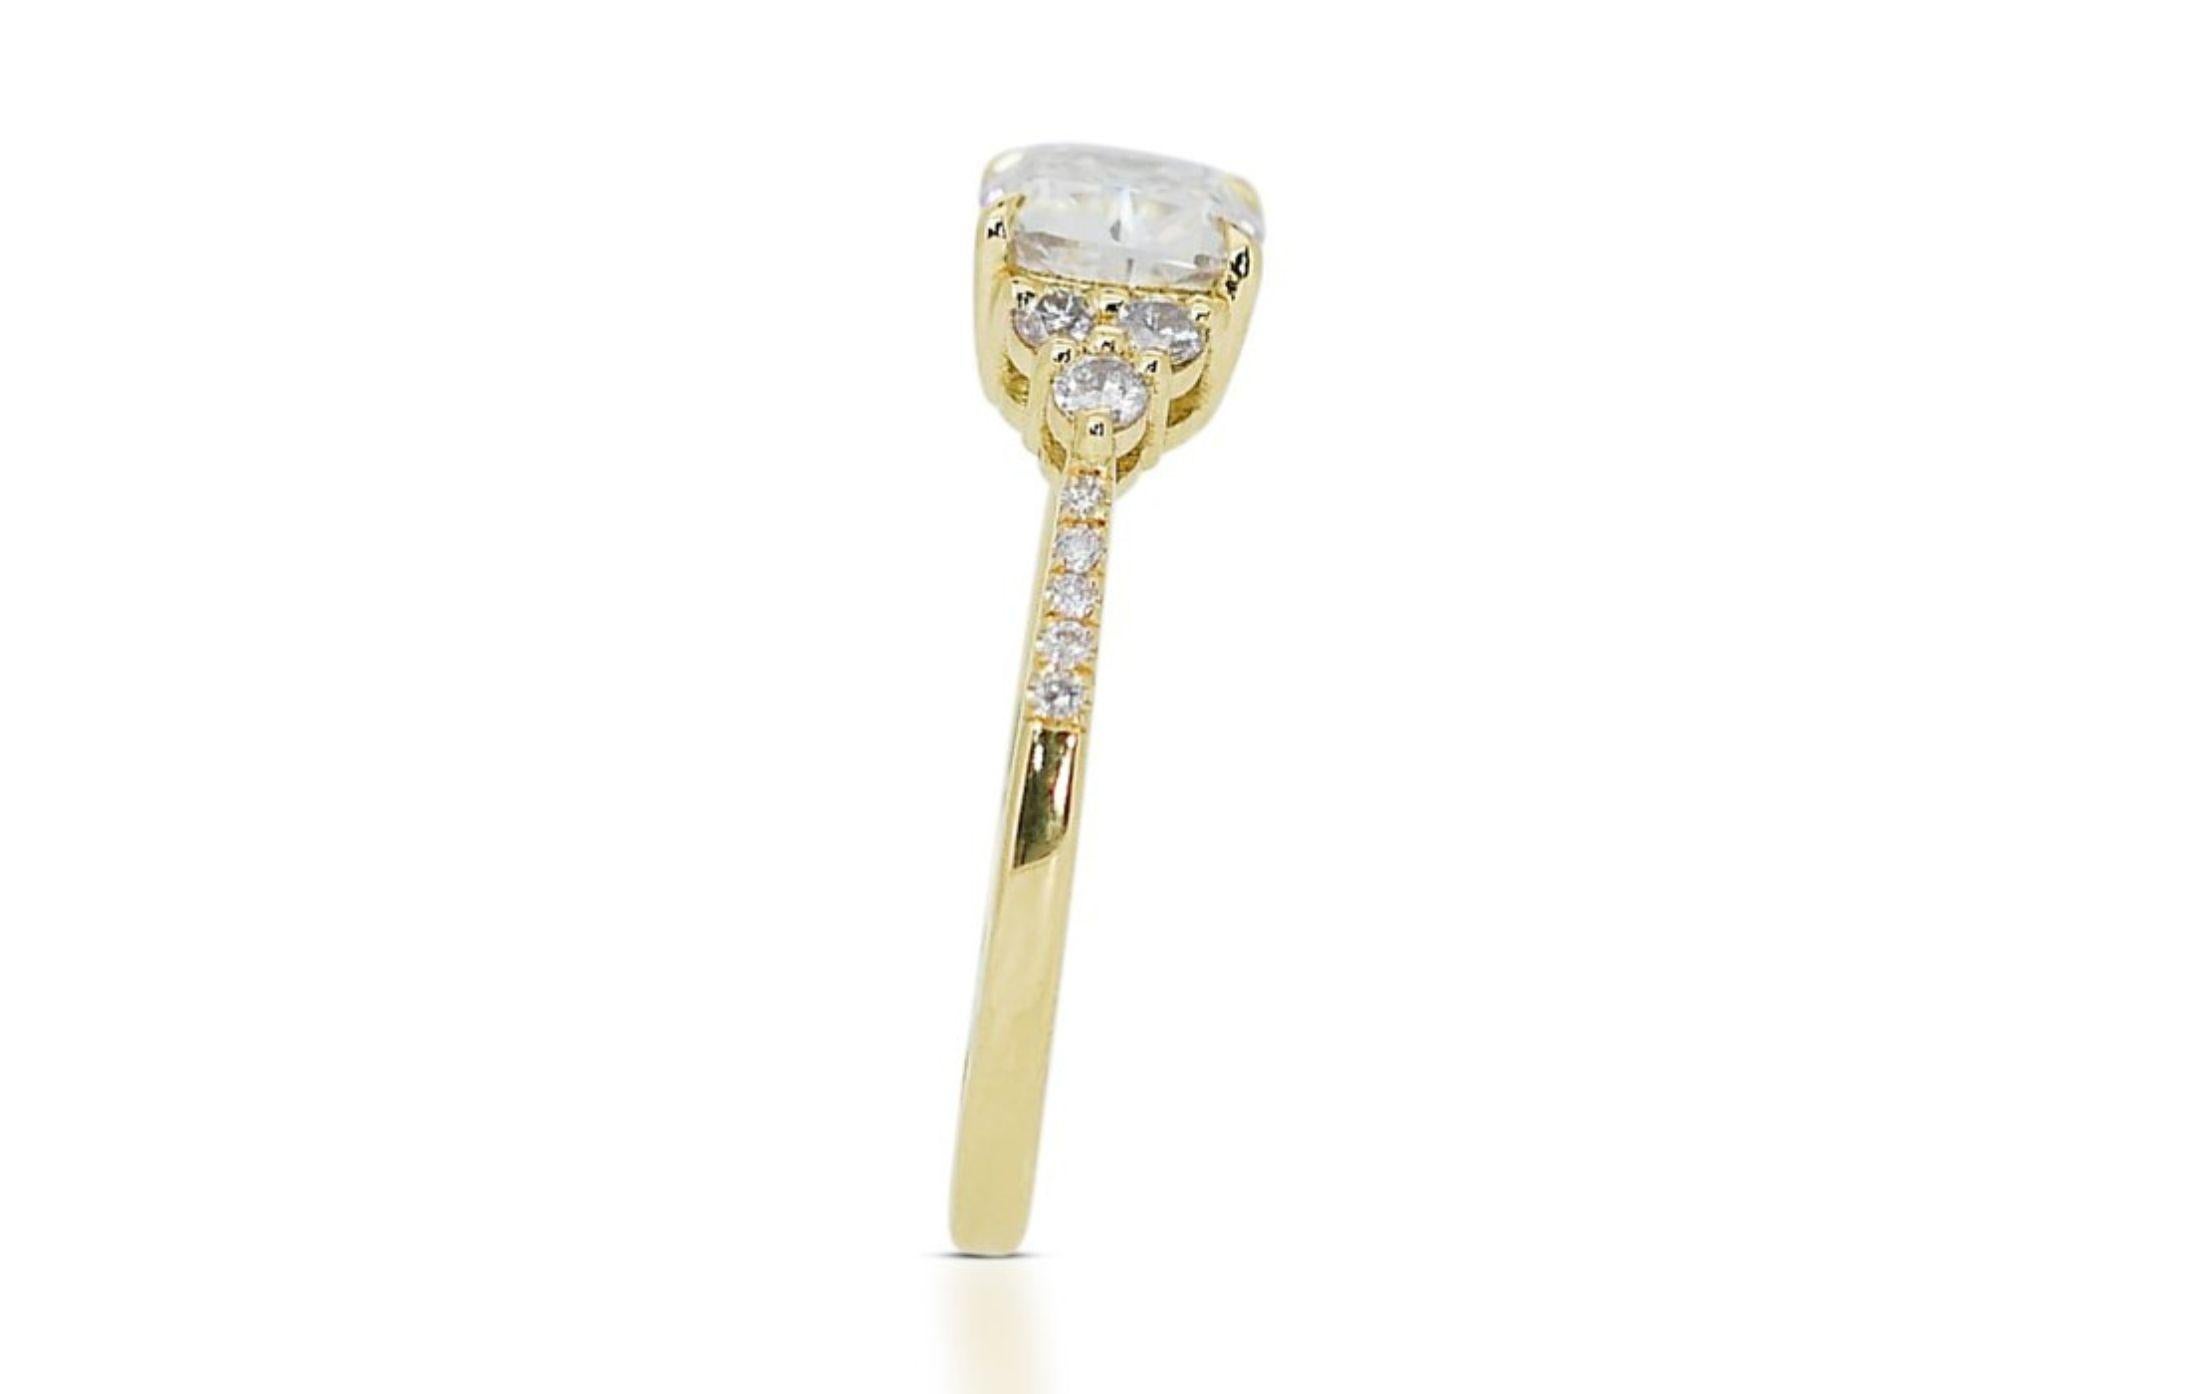 18K Yellow Gold Pave Diamond Ring with a Captivating 1.01ct Cushion-cut Diamond 3